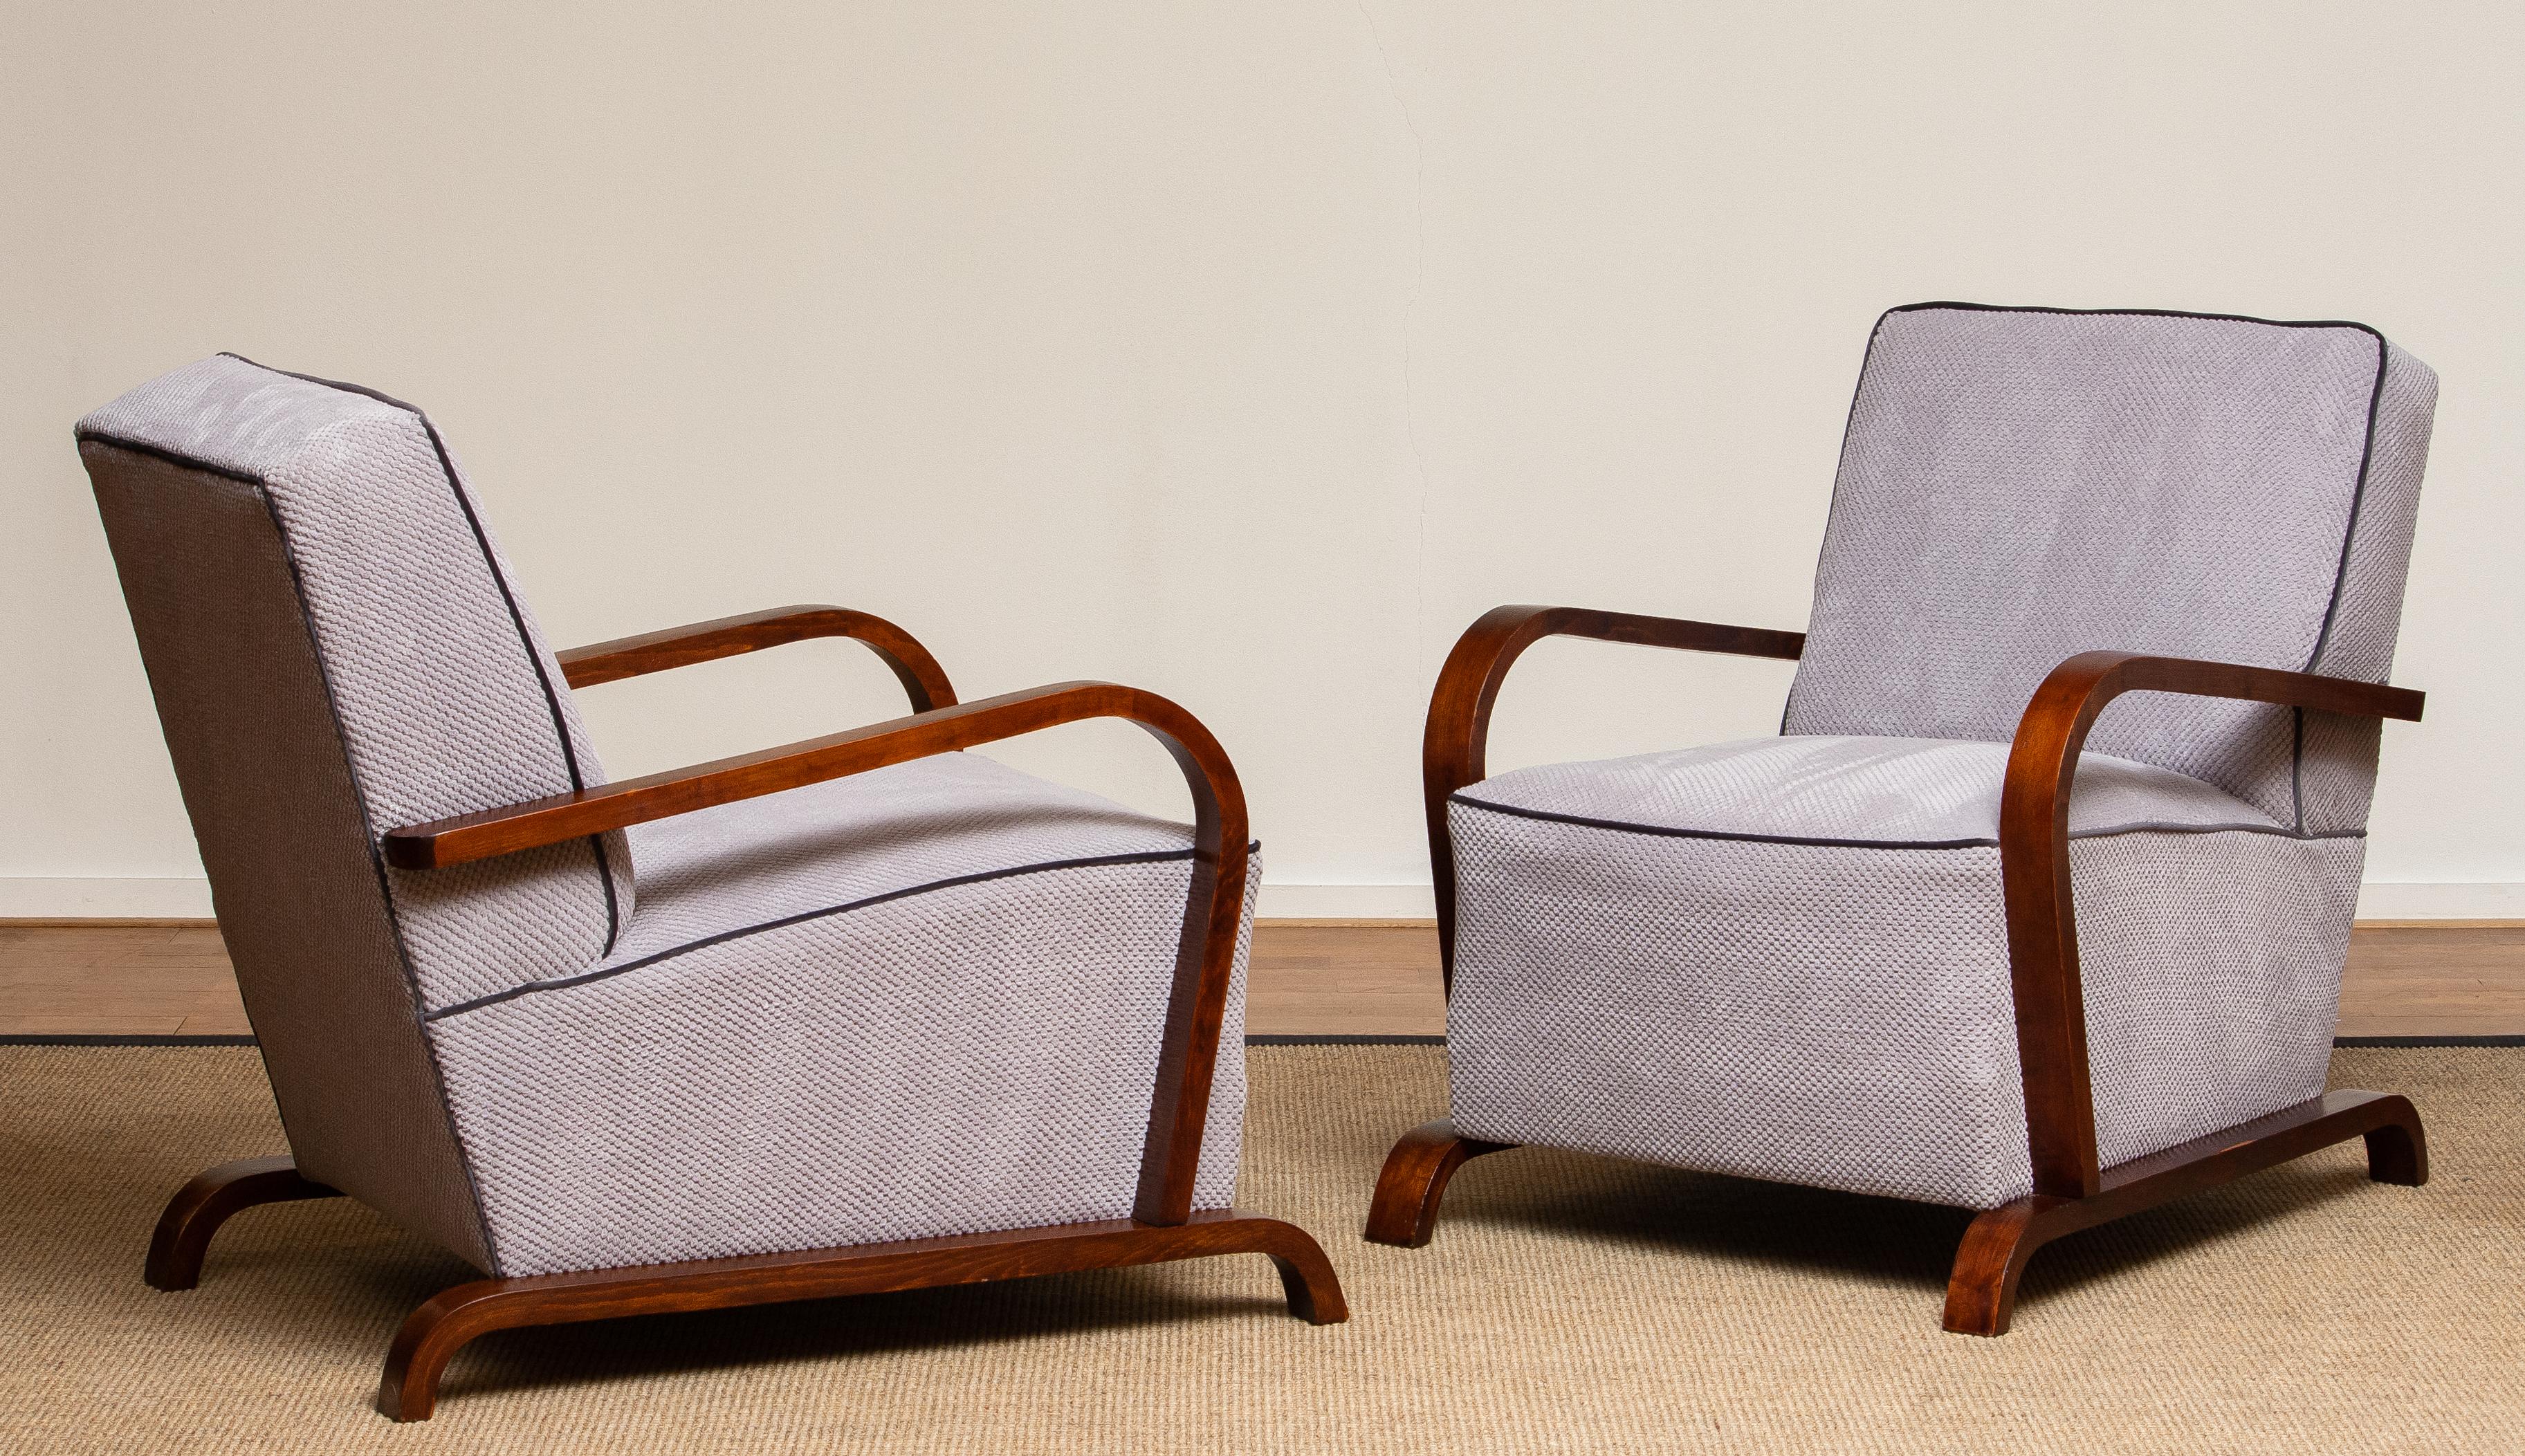 1920s, Pair of Scandinavian Art Deco Armchair / Lounge / Club Chairs from Sweden 1